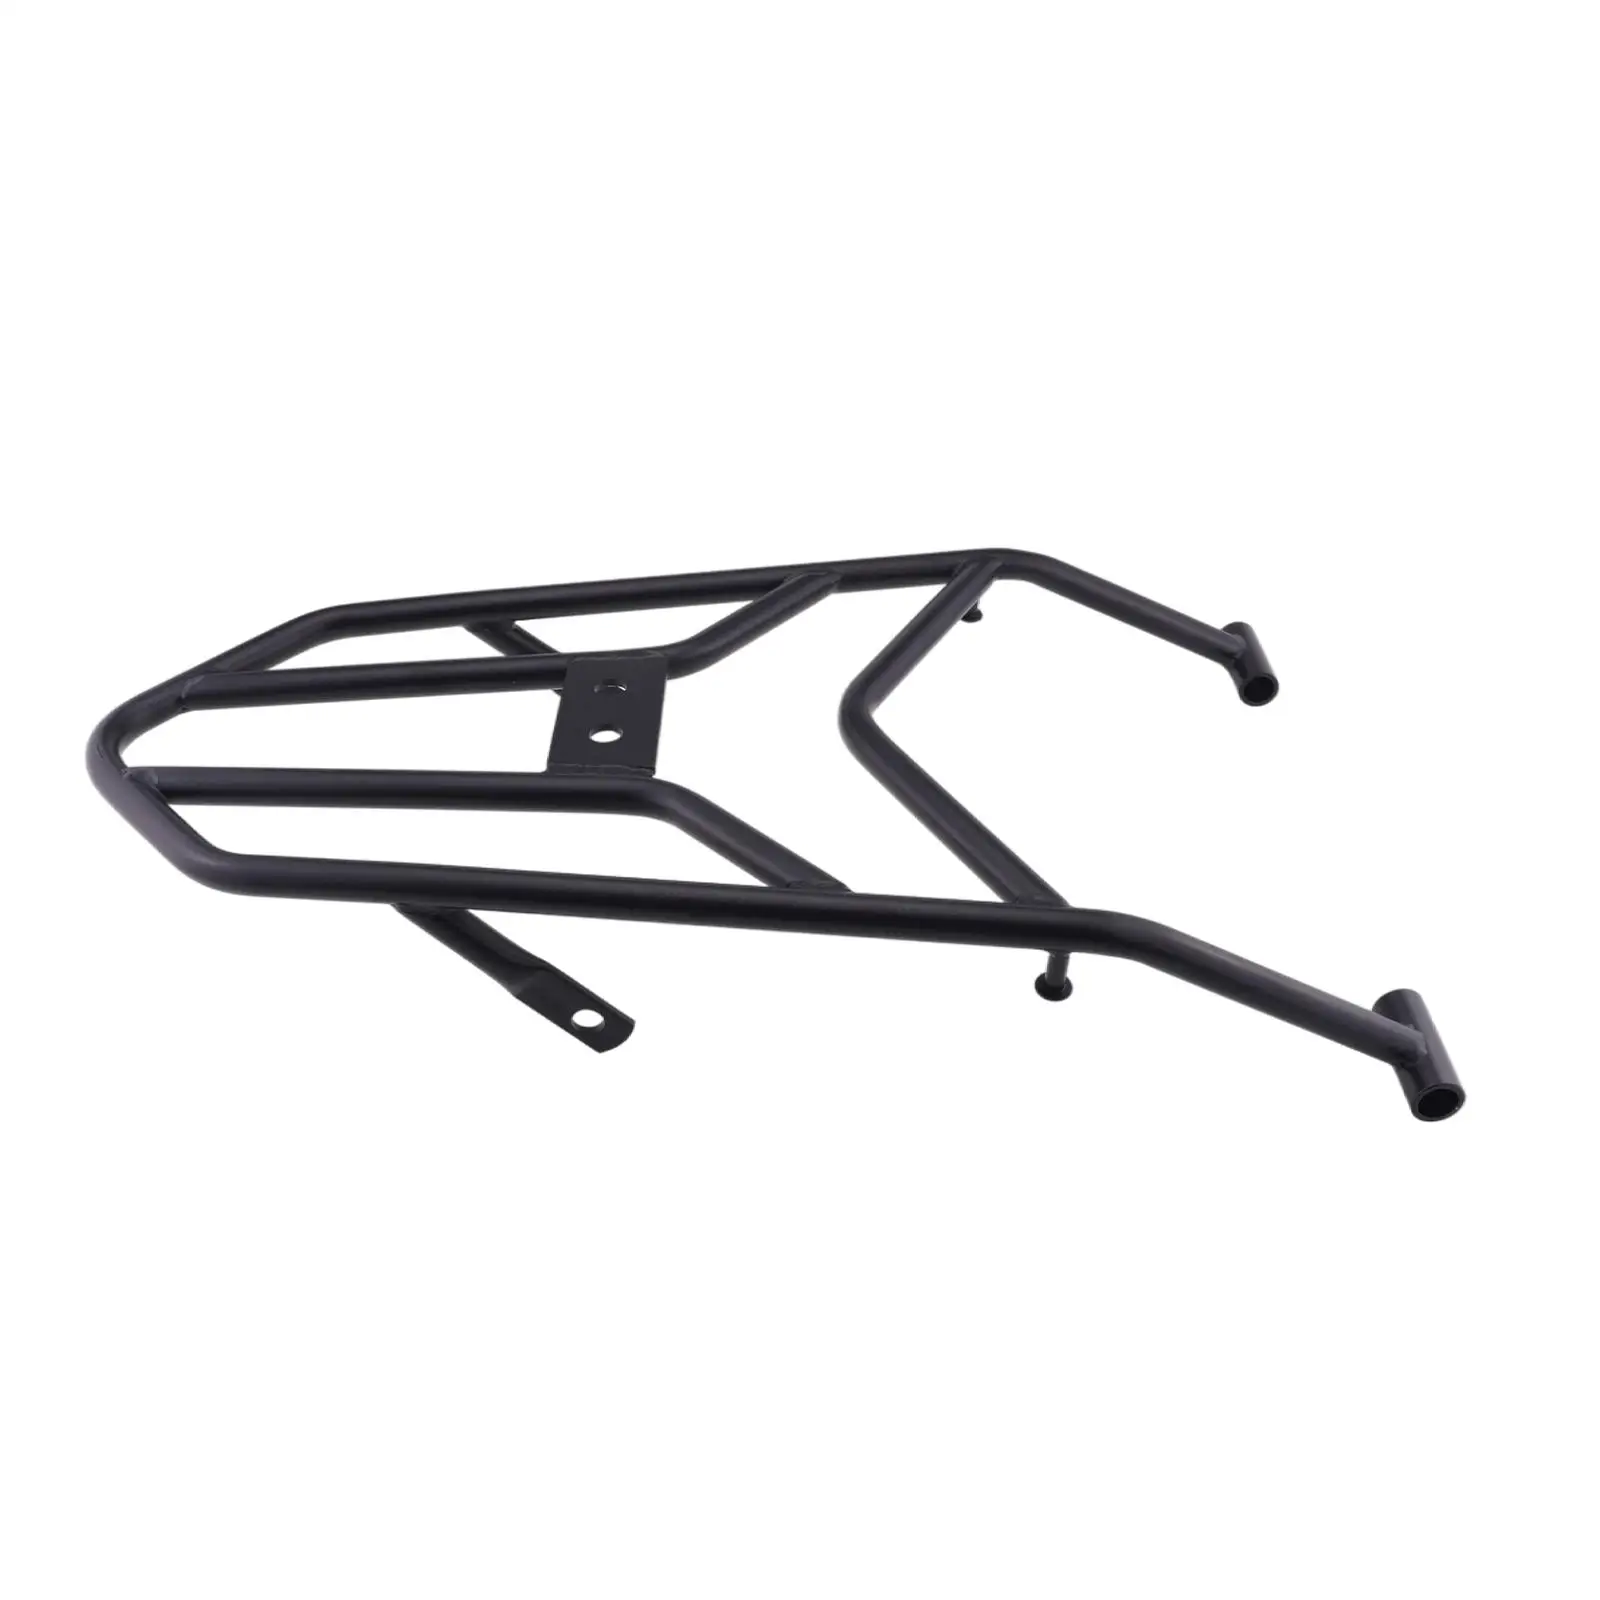 Motorcycle Rear Tail Rack Black Luggage Racks Fits for  Crf250300L